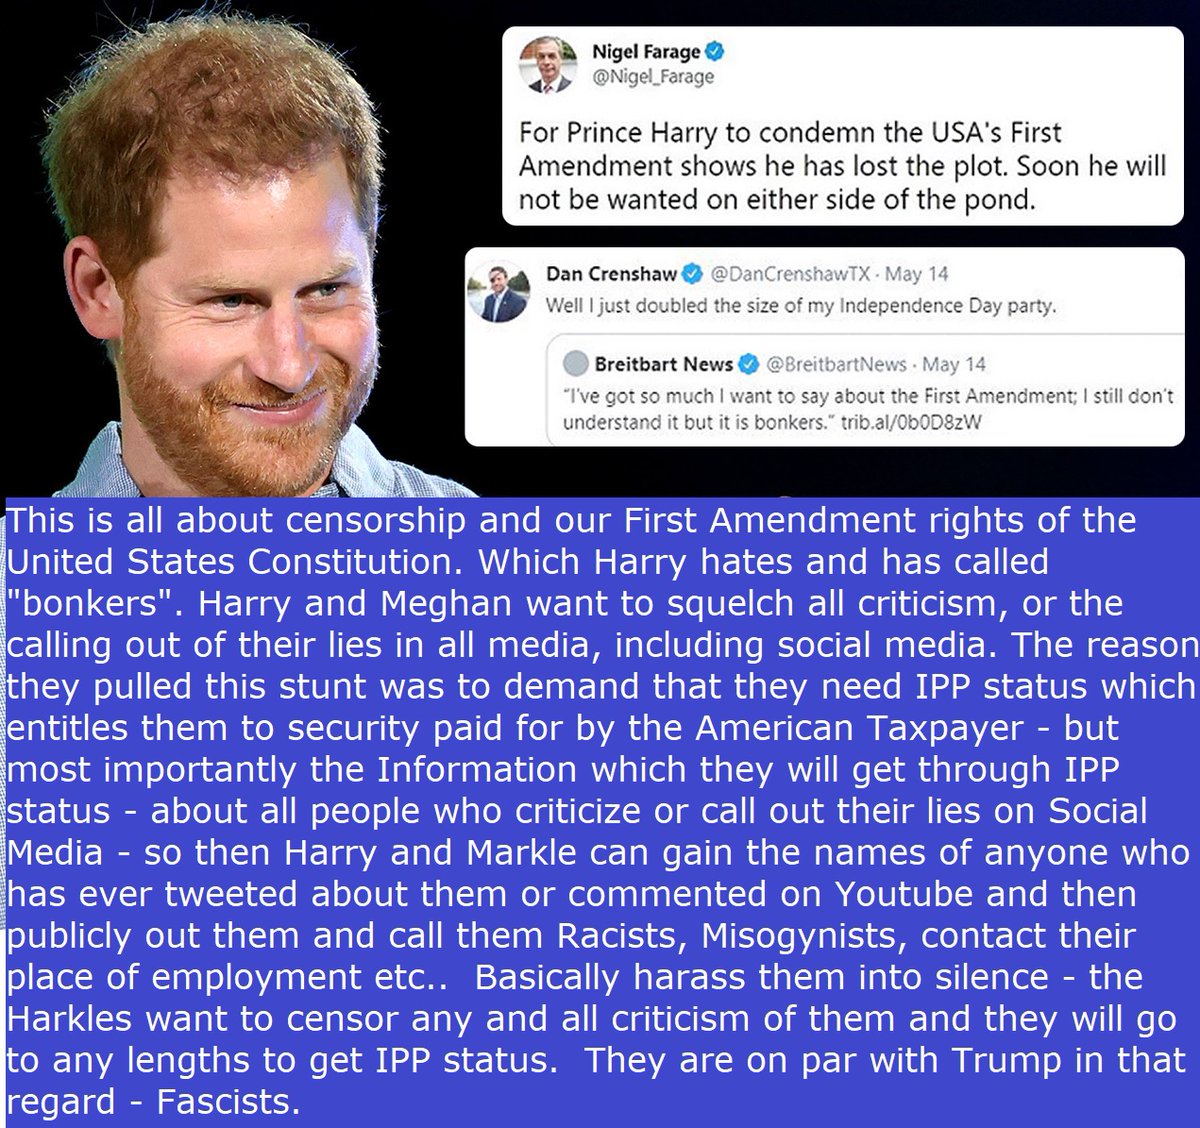 IMPORTANT TO READ. If you want to know why #HarryandMeghan5 really happened, if you want to know what the #DumbPrinceAndHisStupidWife really want, and why #MeghanAndHarryAreLiars about this whole charade - read this about what they will do if they get IPP status. It's scary.